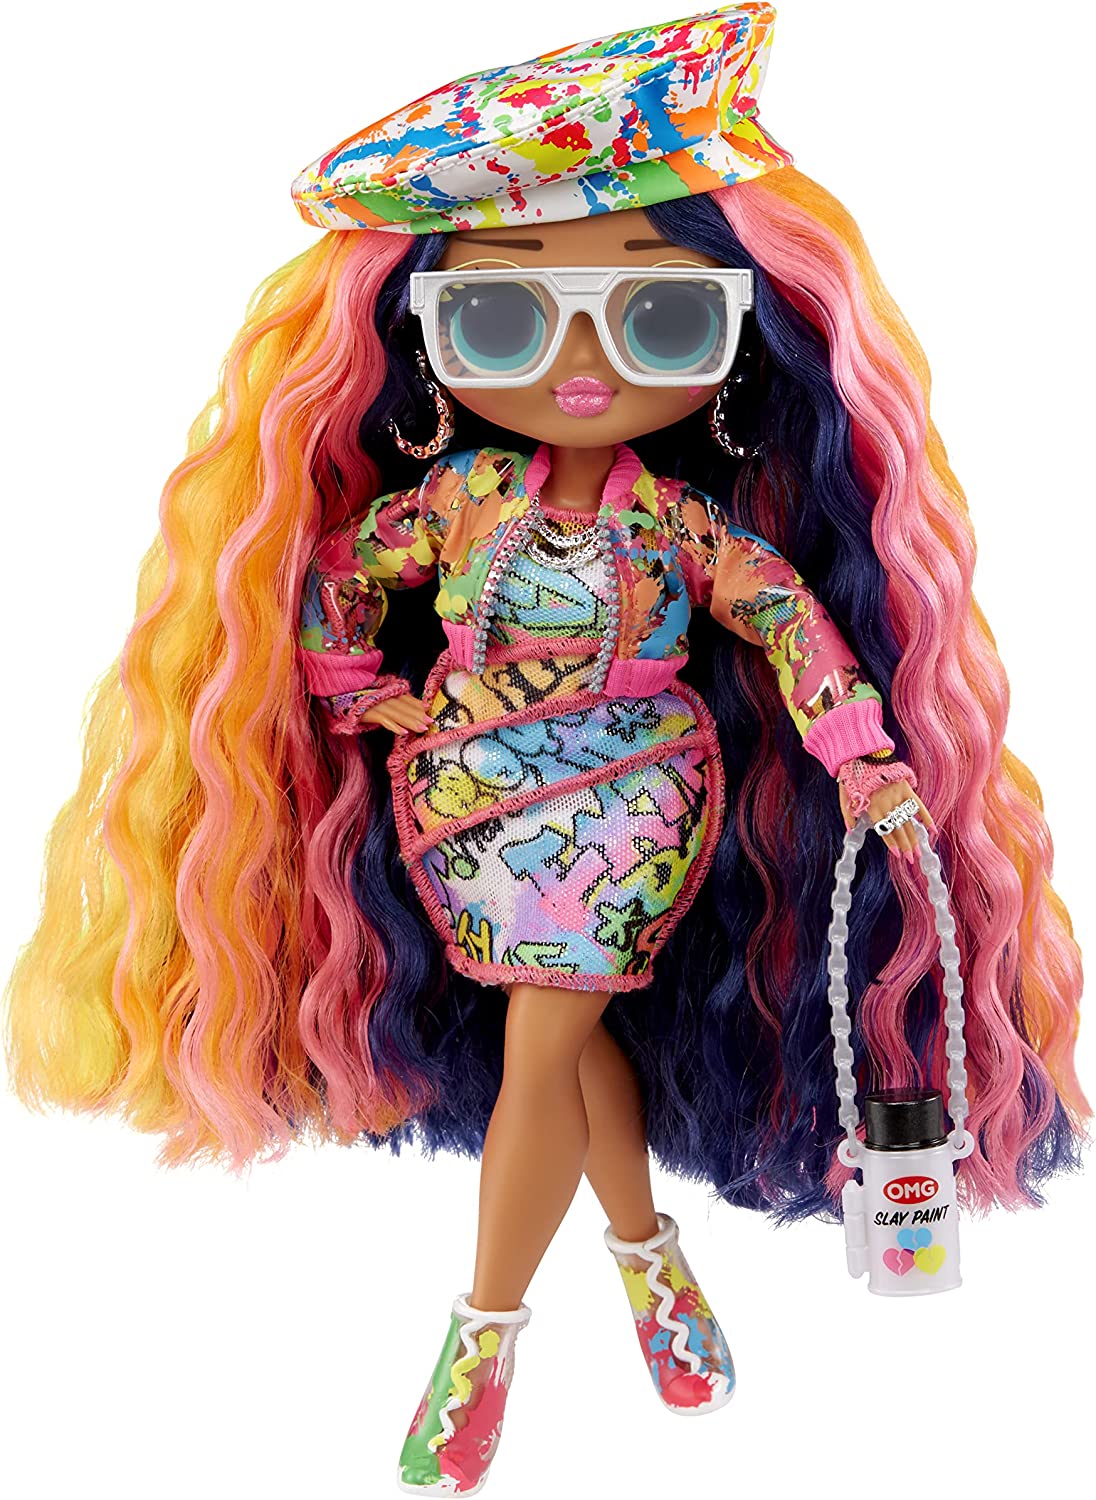 LOL Surprise OMG Sketches Fashion Doll with 20 Surprises Including Accessories in Stylish Outfit, Holiday Toy Great Gift for Kids Girls Boys Ages 4 5 6+ Years Old & Collectors